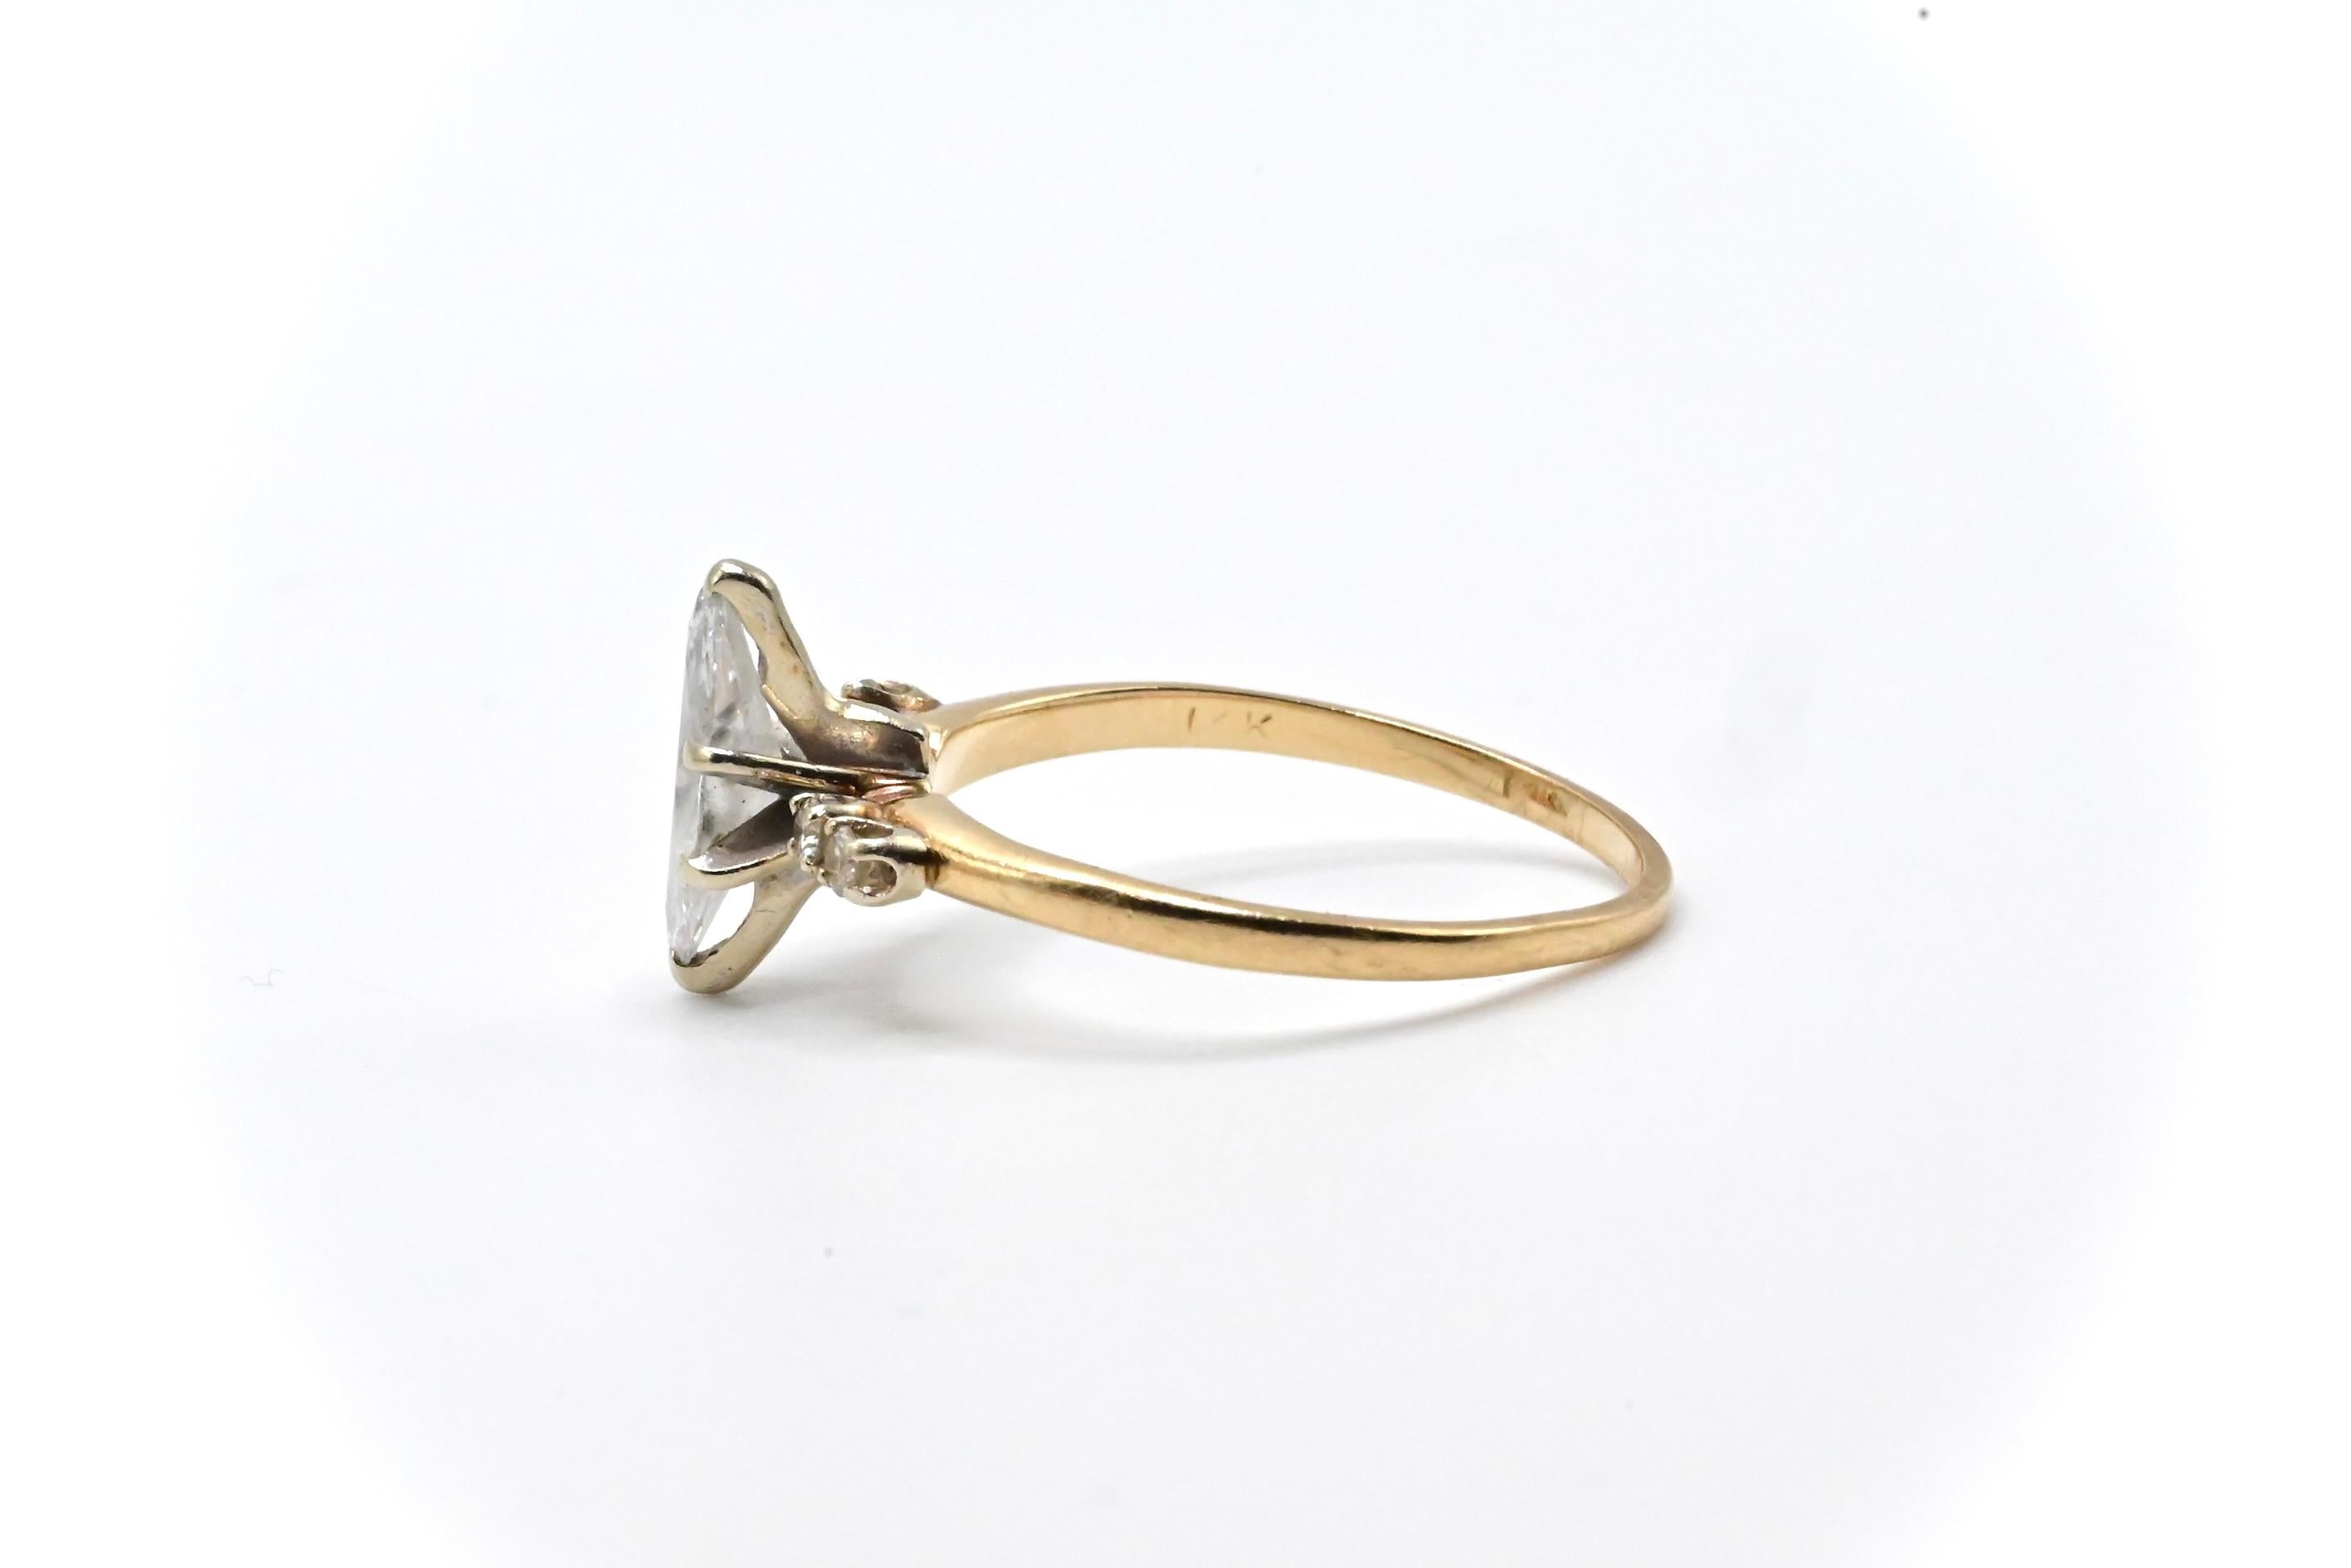 This is a delightful ring made with 14k yellow gold, and a stunning marquise cut diamond centerpiece with two round cut diamonds complementing it on each side. It’s perfect for someone who’s looking for something elegant, yet simple in looks.